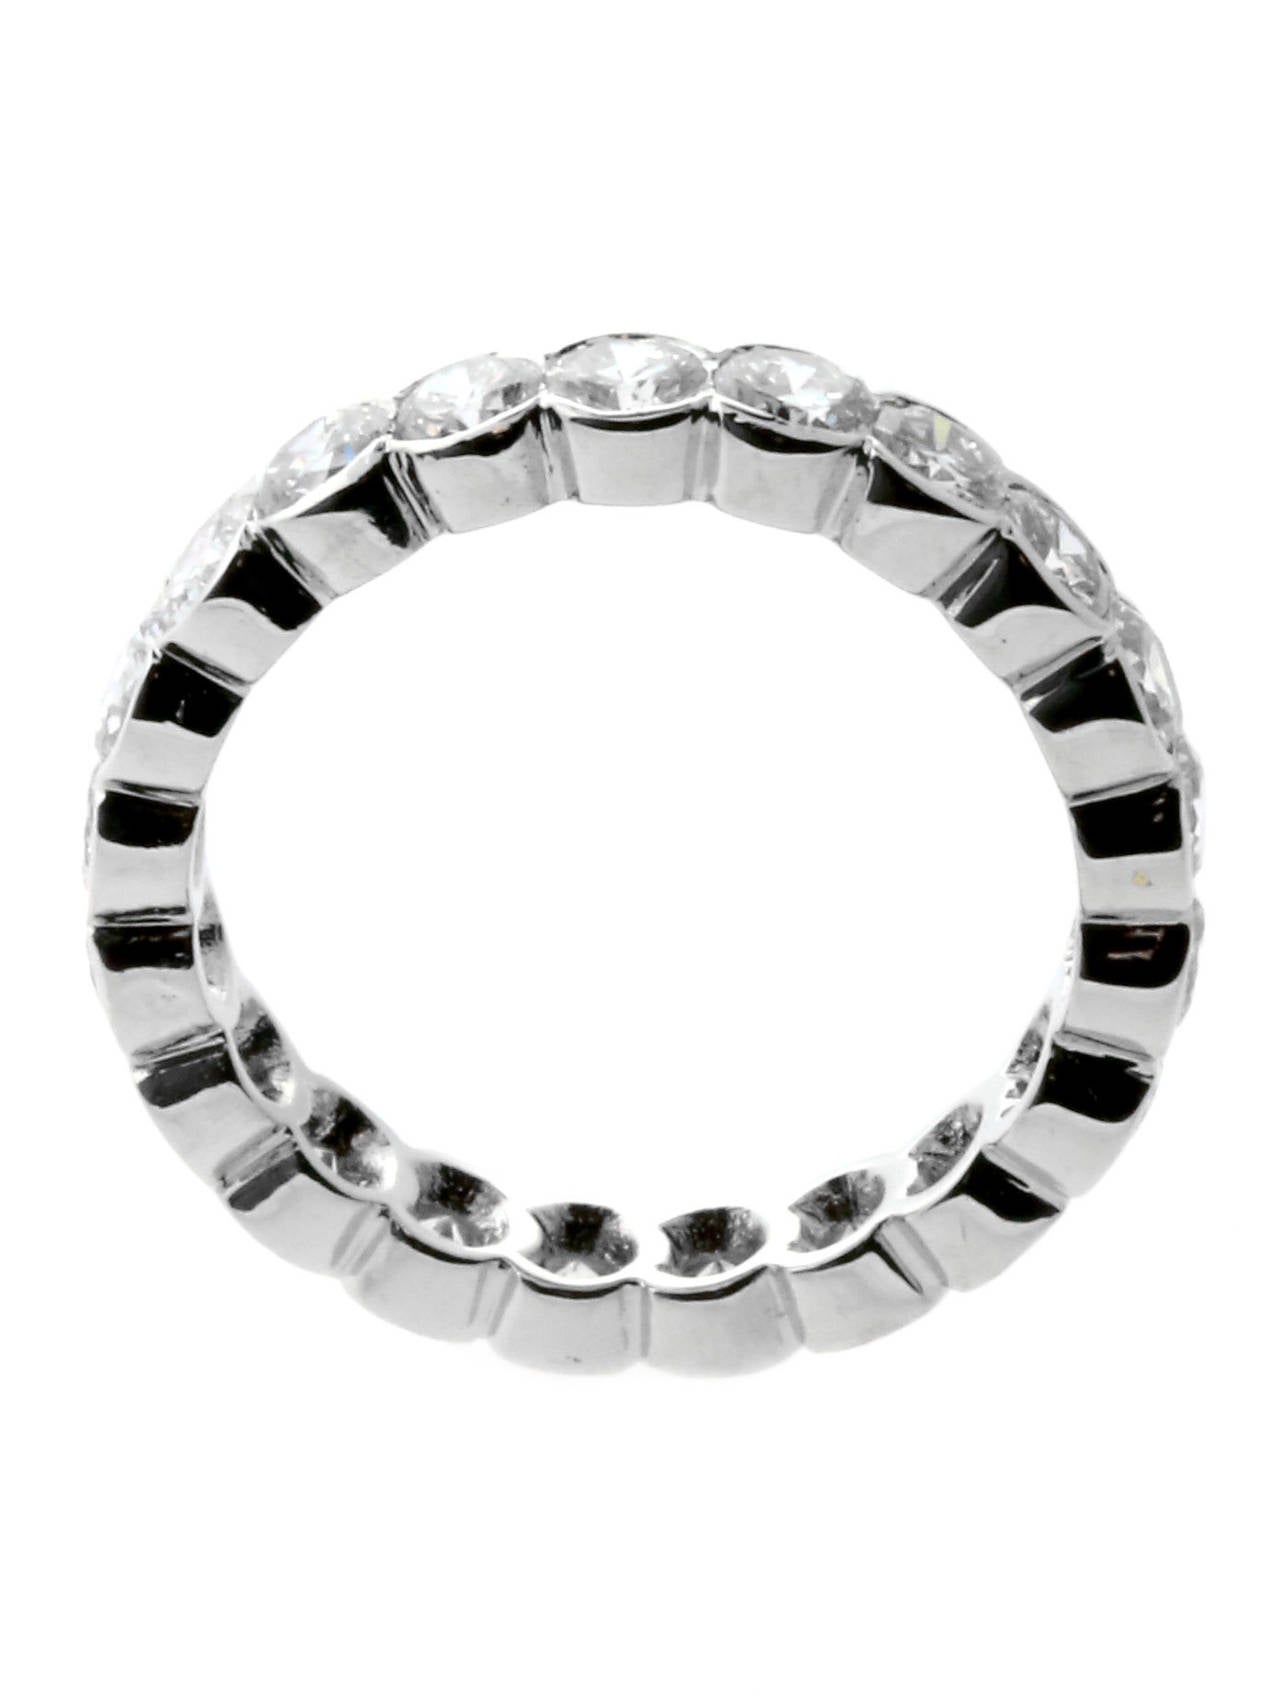 A fabulous Van Cleef & Arpels eternity band featuring 1.81ct of the finest Van Cleef & Arpels round brilliant cut diamonds immaculately set in 18k white gold

Size: US 4 1/2 / EU 48
Dimensions: .13